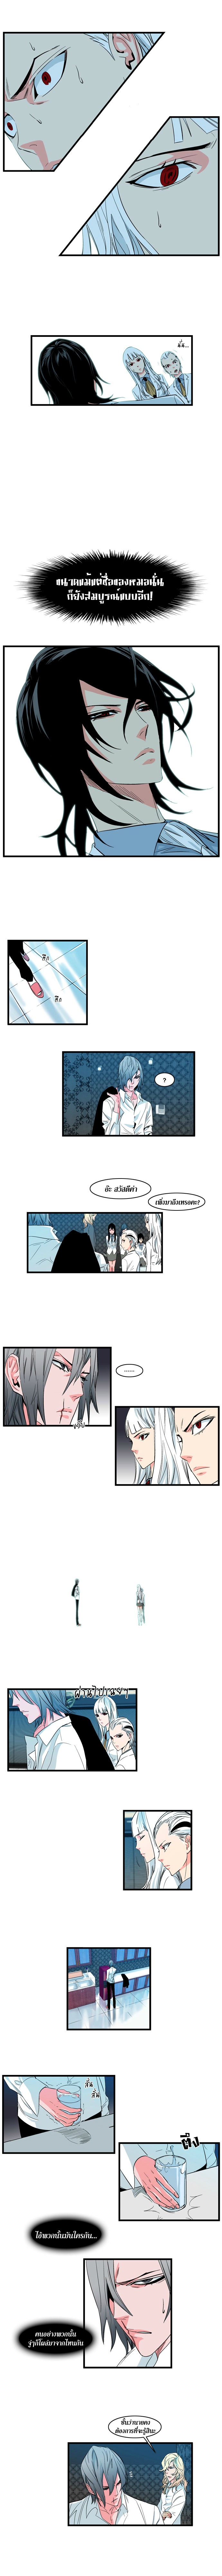 Noblesse 100 004